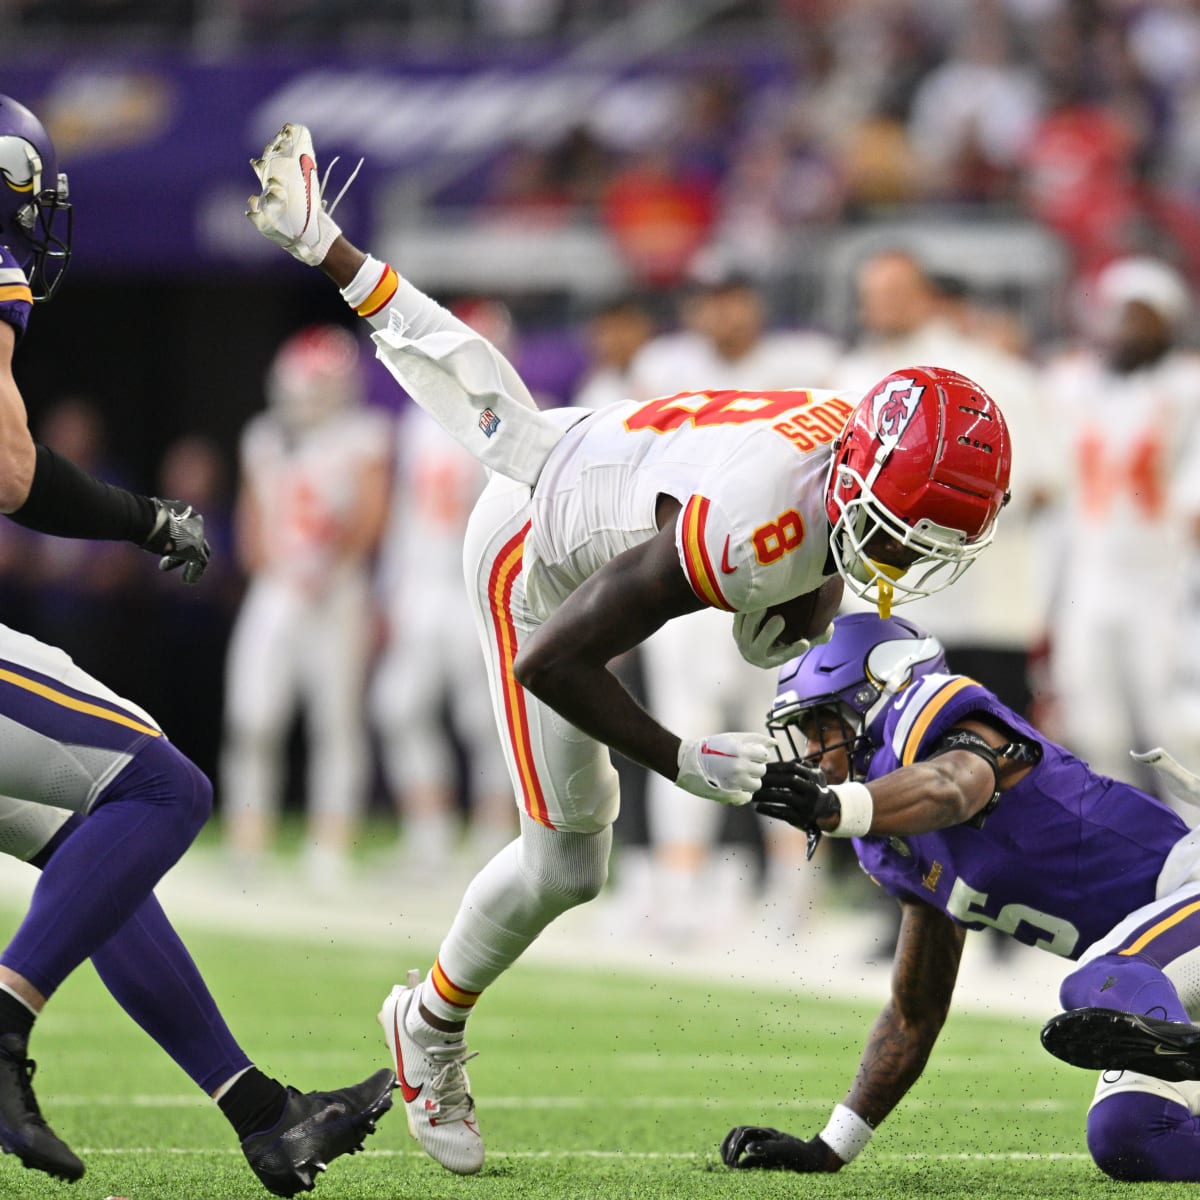 Chiefs' WR Justyn Ross reinstated; Andy Reid weighs in on return